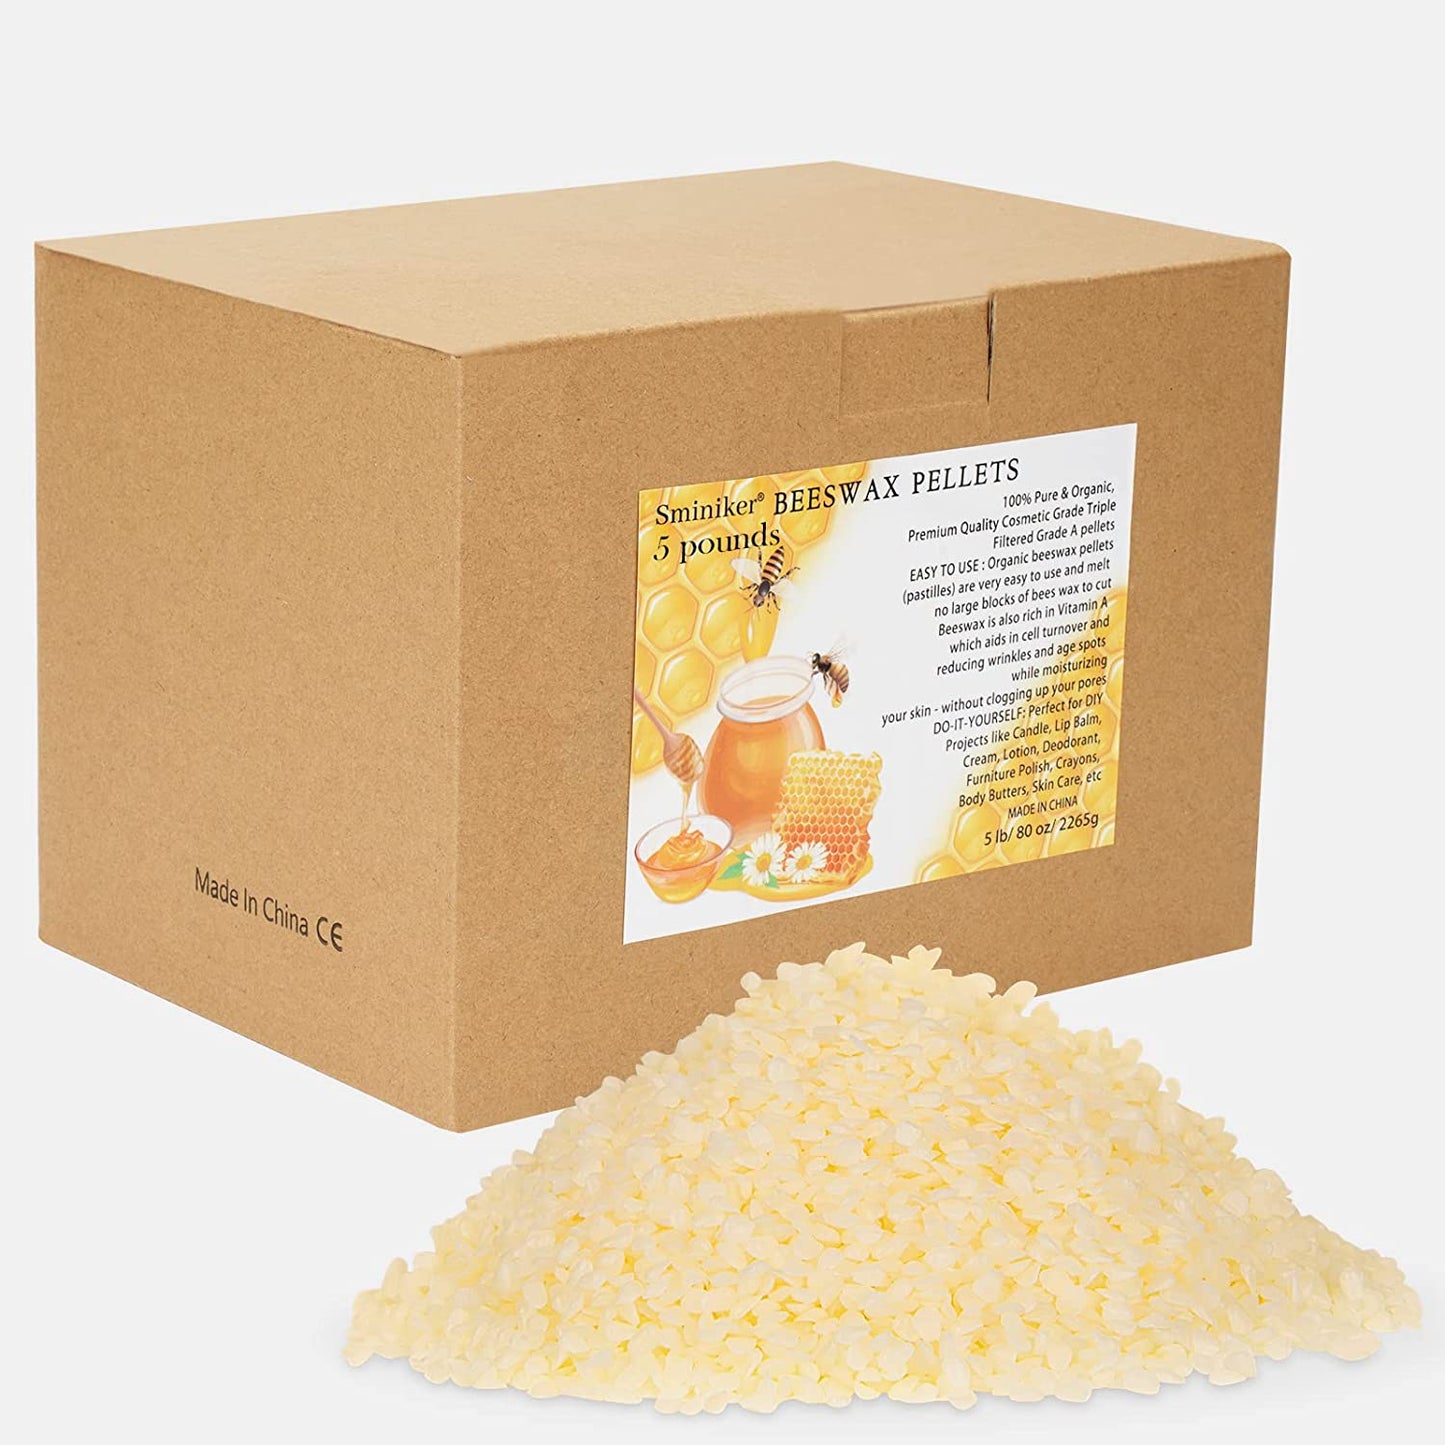 5LB Beeswax Pellets Beeswax for Candle Making Organic Beeswax Pellets for Skin Beeswax Beads Beeswax Bulk Beeswax for Lotion Making Organic for DIY and Craft Project